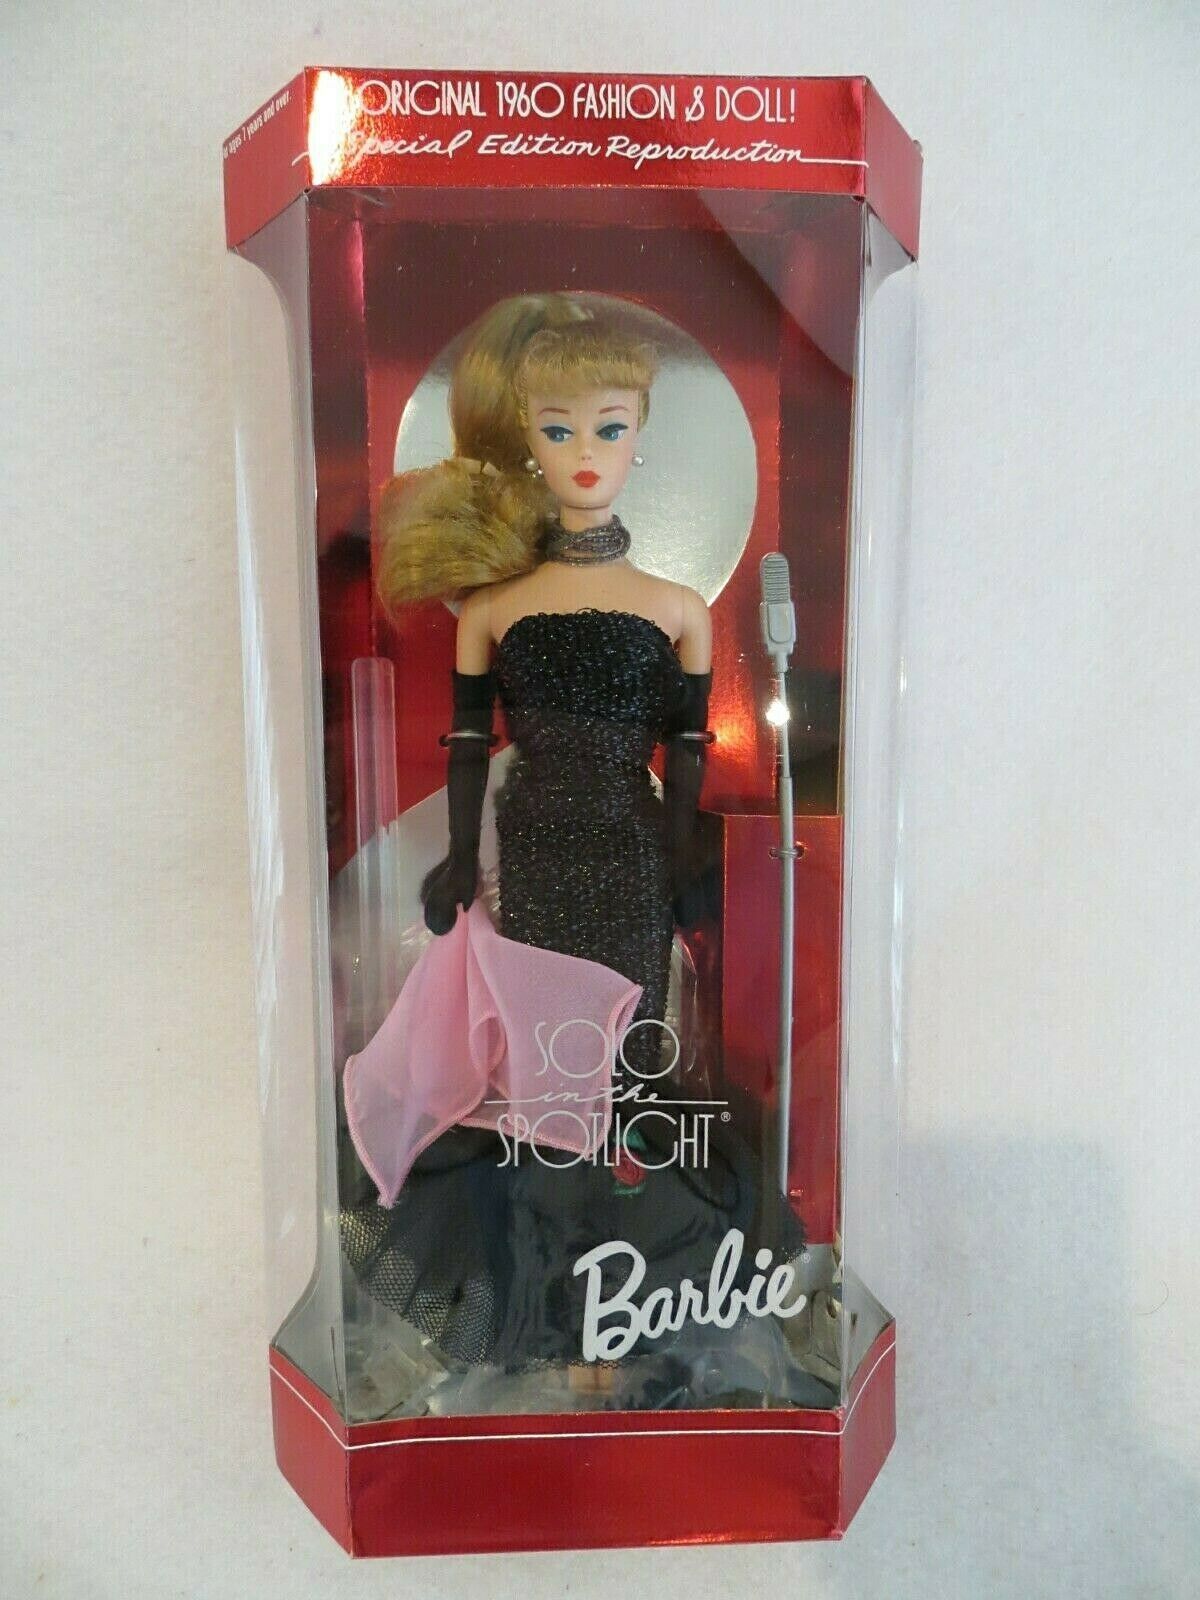 Barbie Solo In The Spotlight Doll Blonde Hair 1994 Special Edition #13534 Nrfb